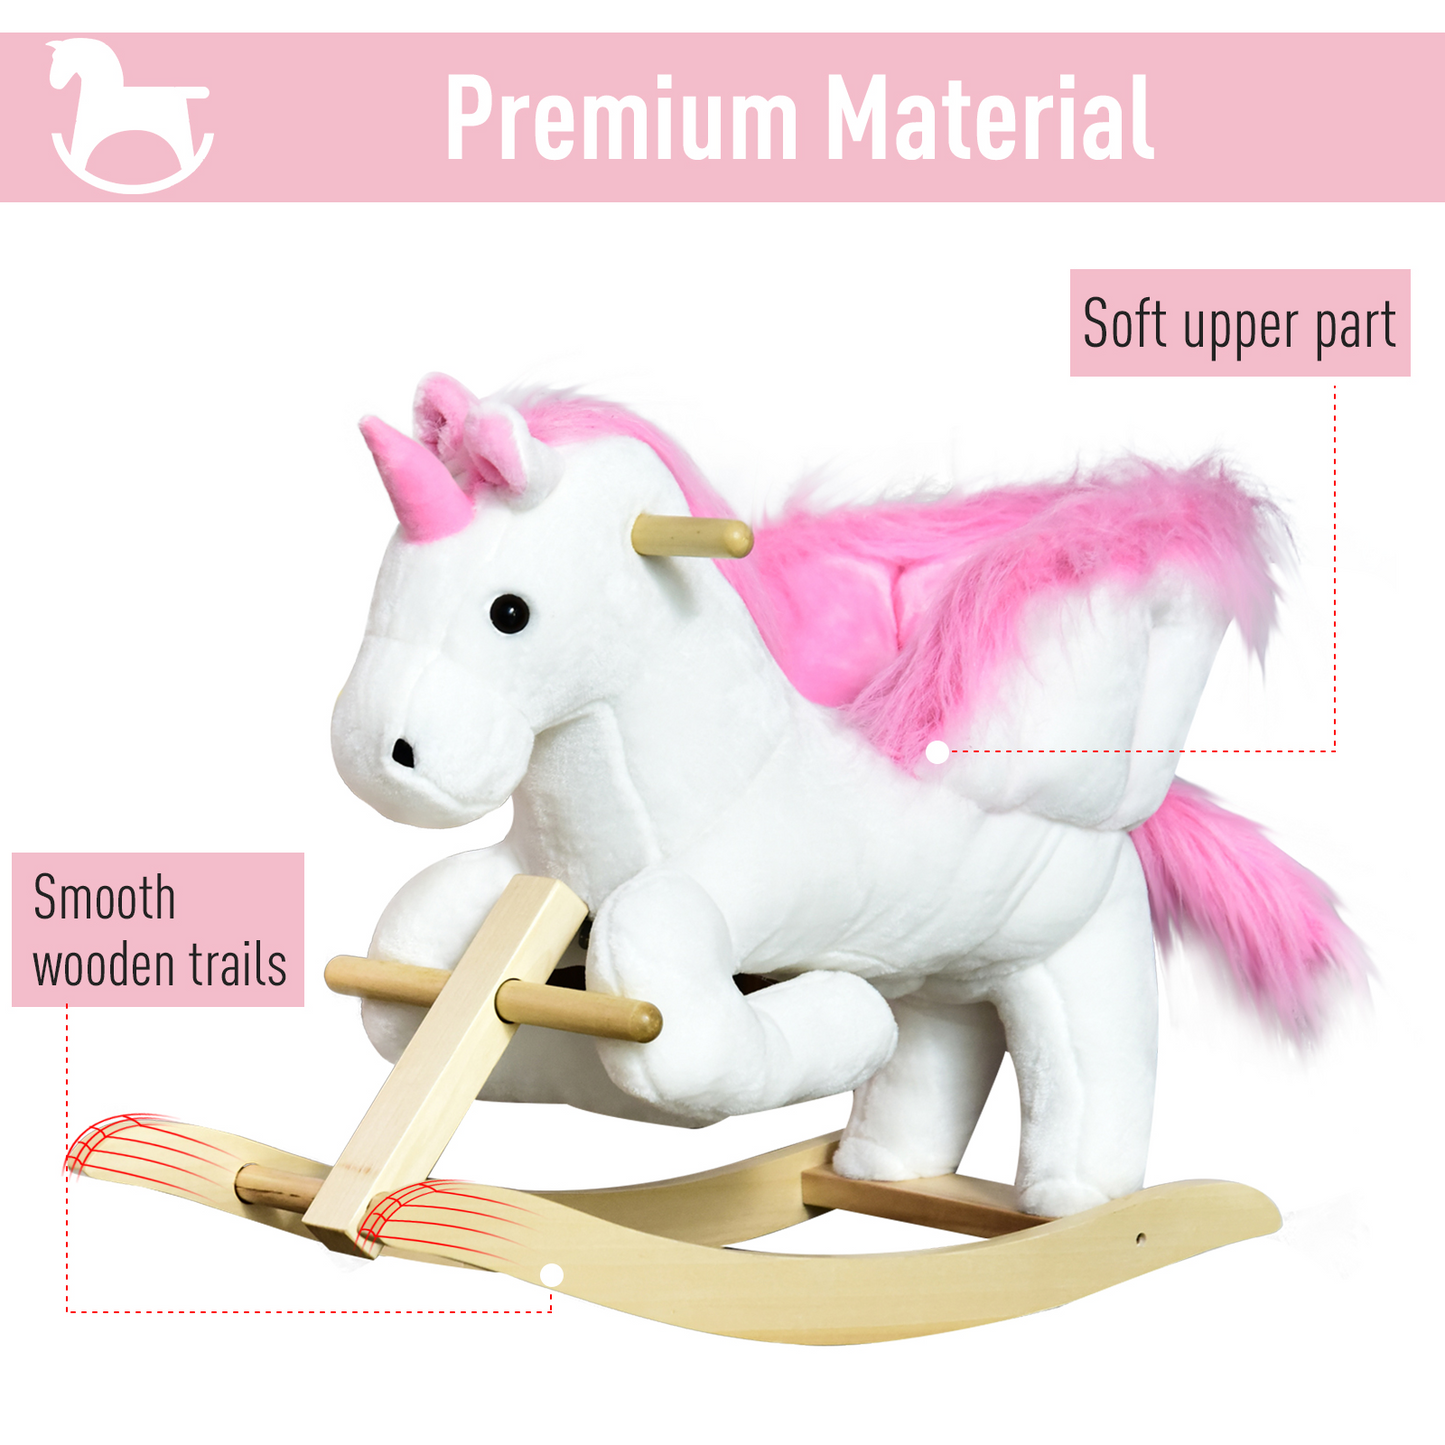 HOMCOM Kids Wooden Plush Ride On Unicorn Rocking Horse Chair Toy with music